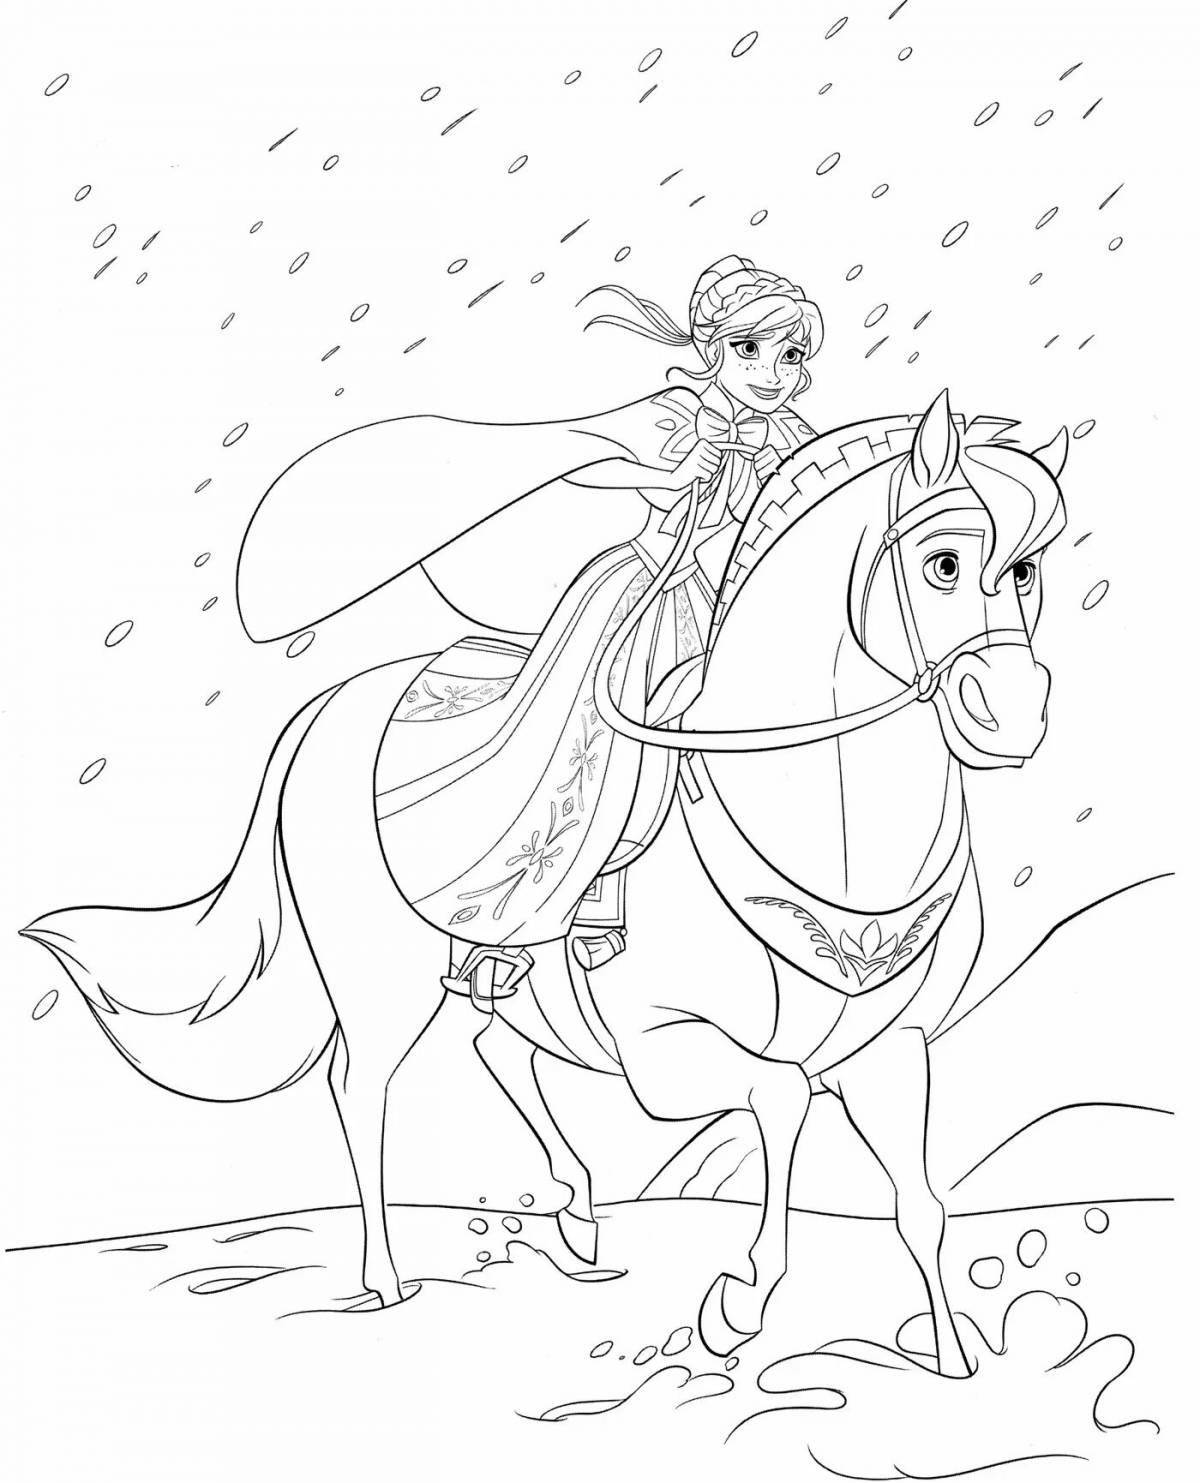 Fairytale coloring princess on a horse